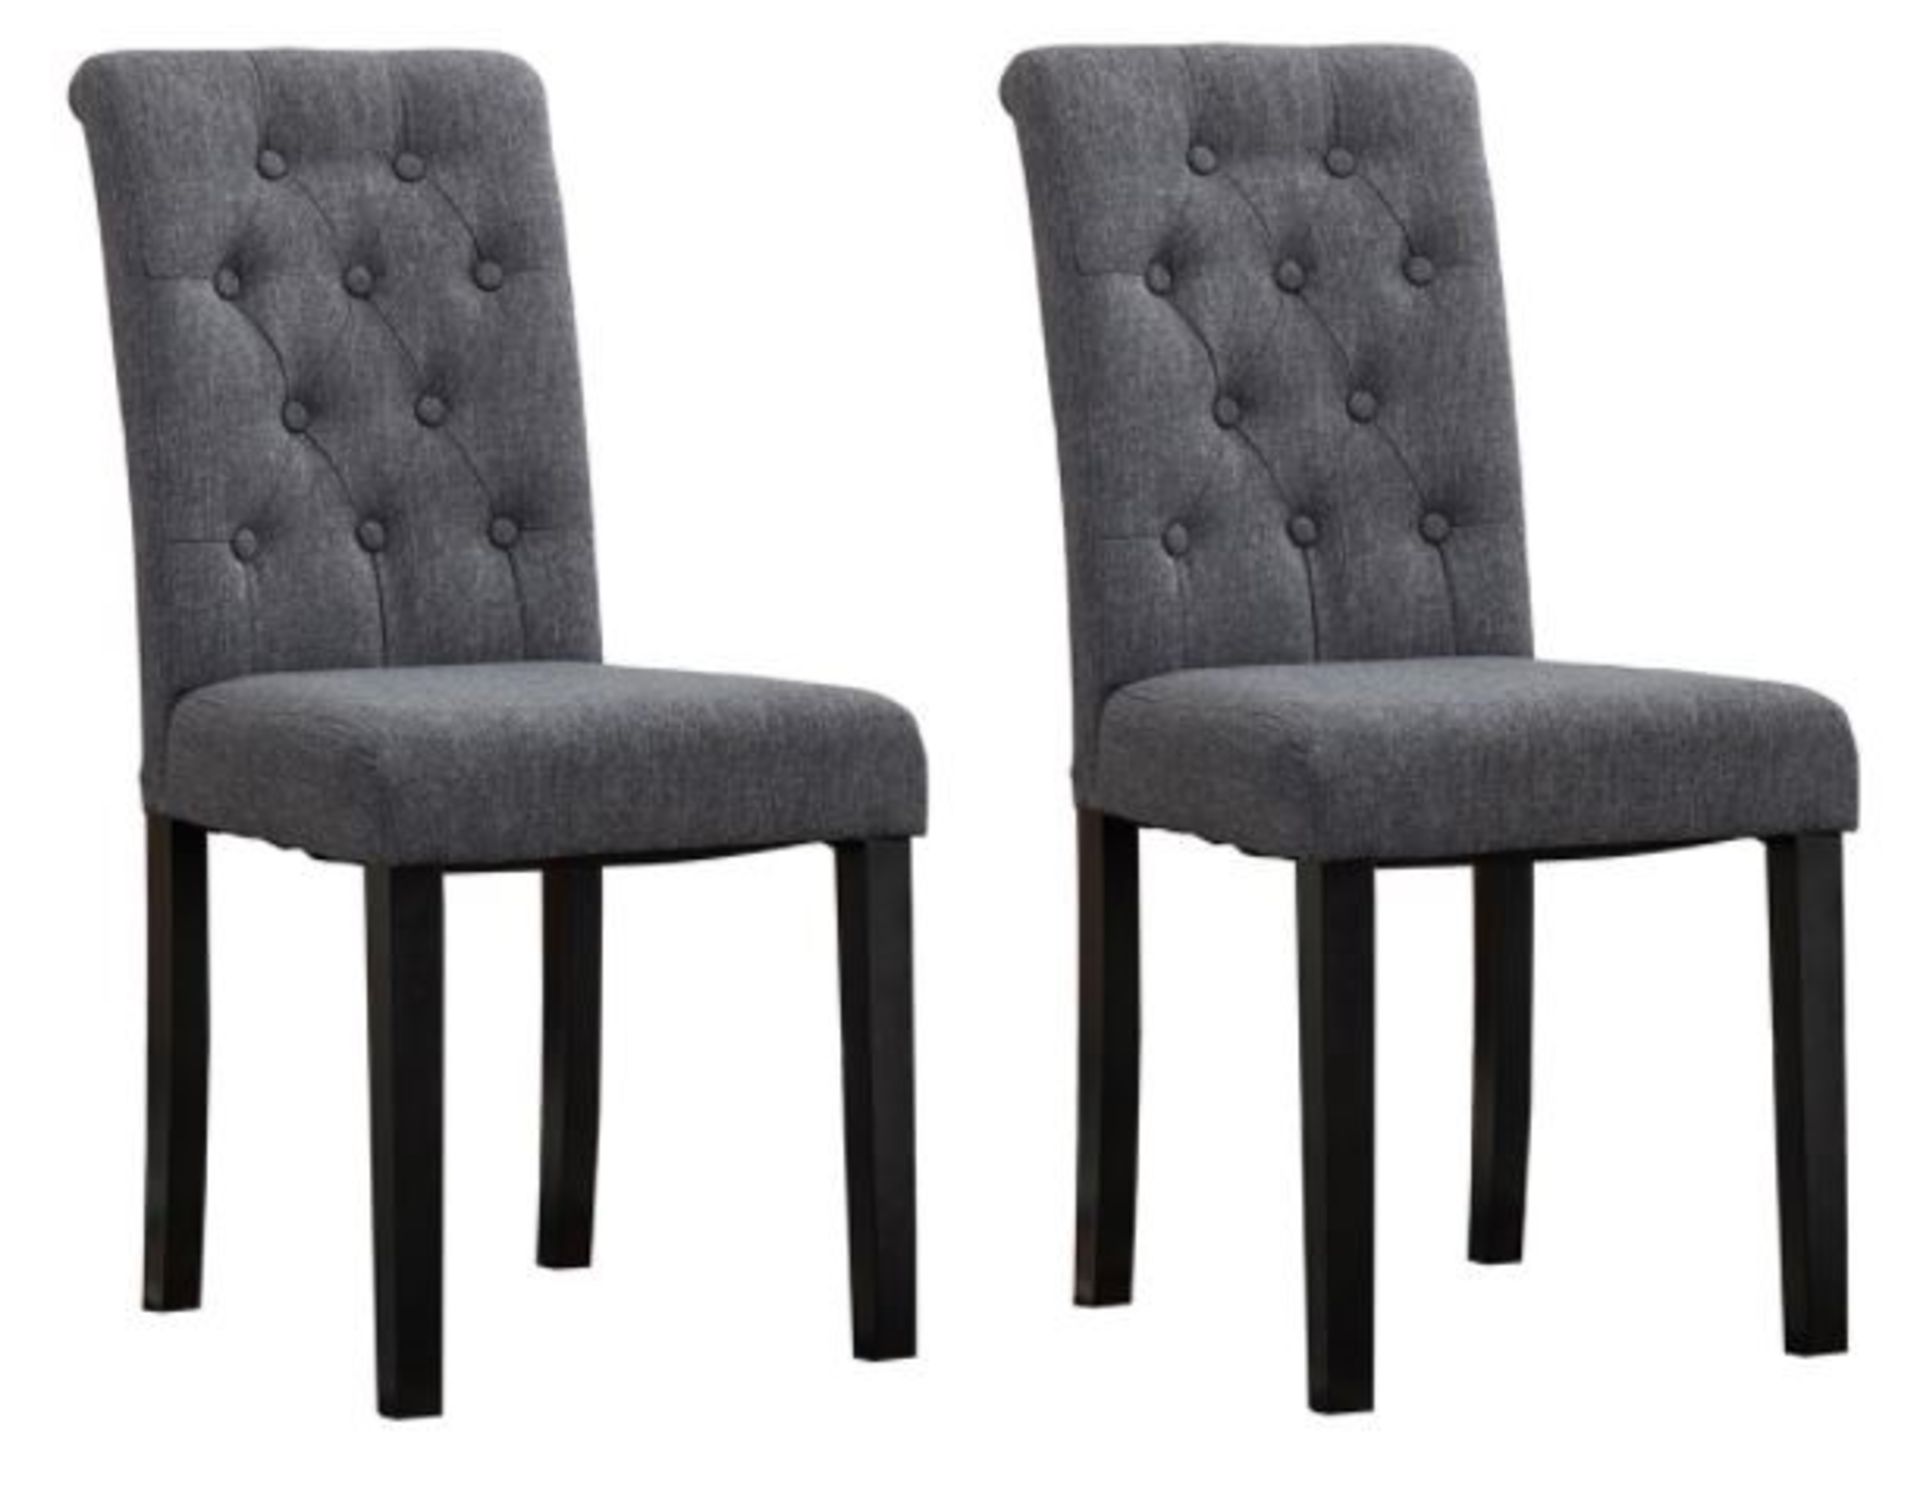 ONE LOT TO CONTAIN ONE SET OF 2 FABIO FABRIC DINING CHAIRS IN GREY / GRADE A / LIKE NEW / RRP £60.